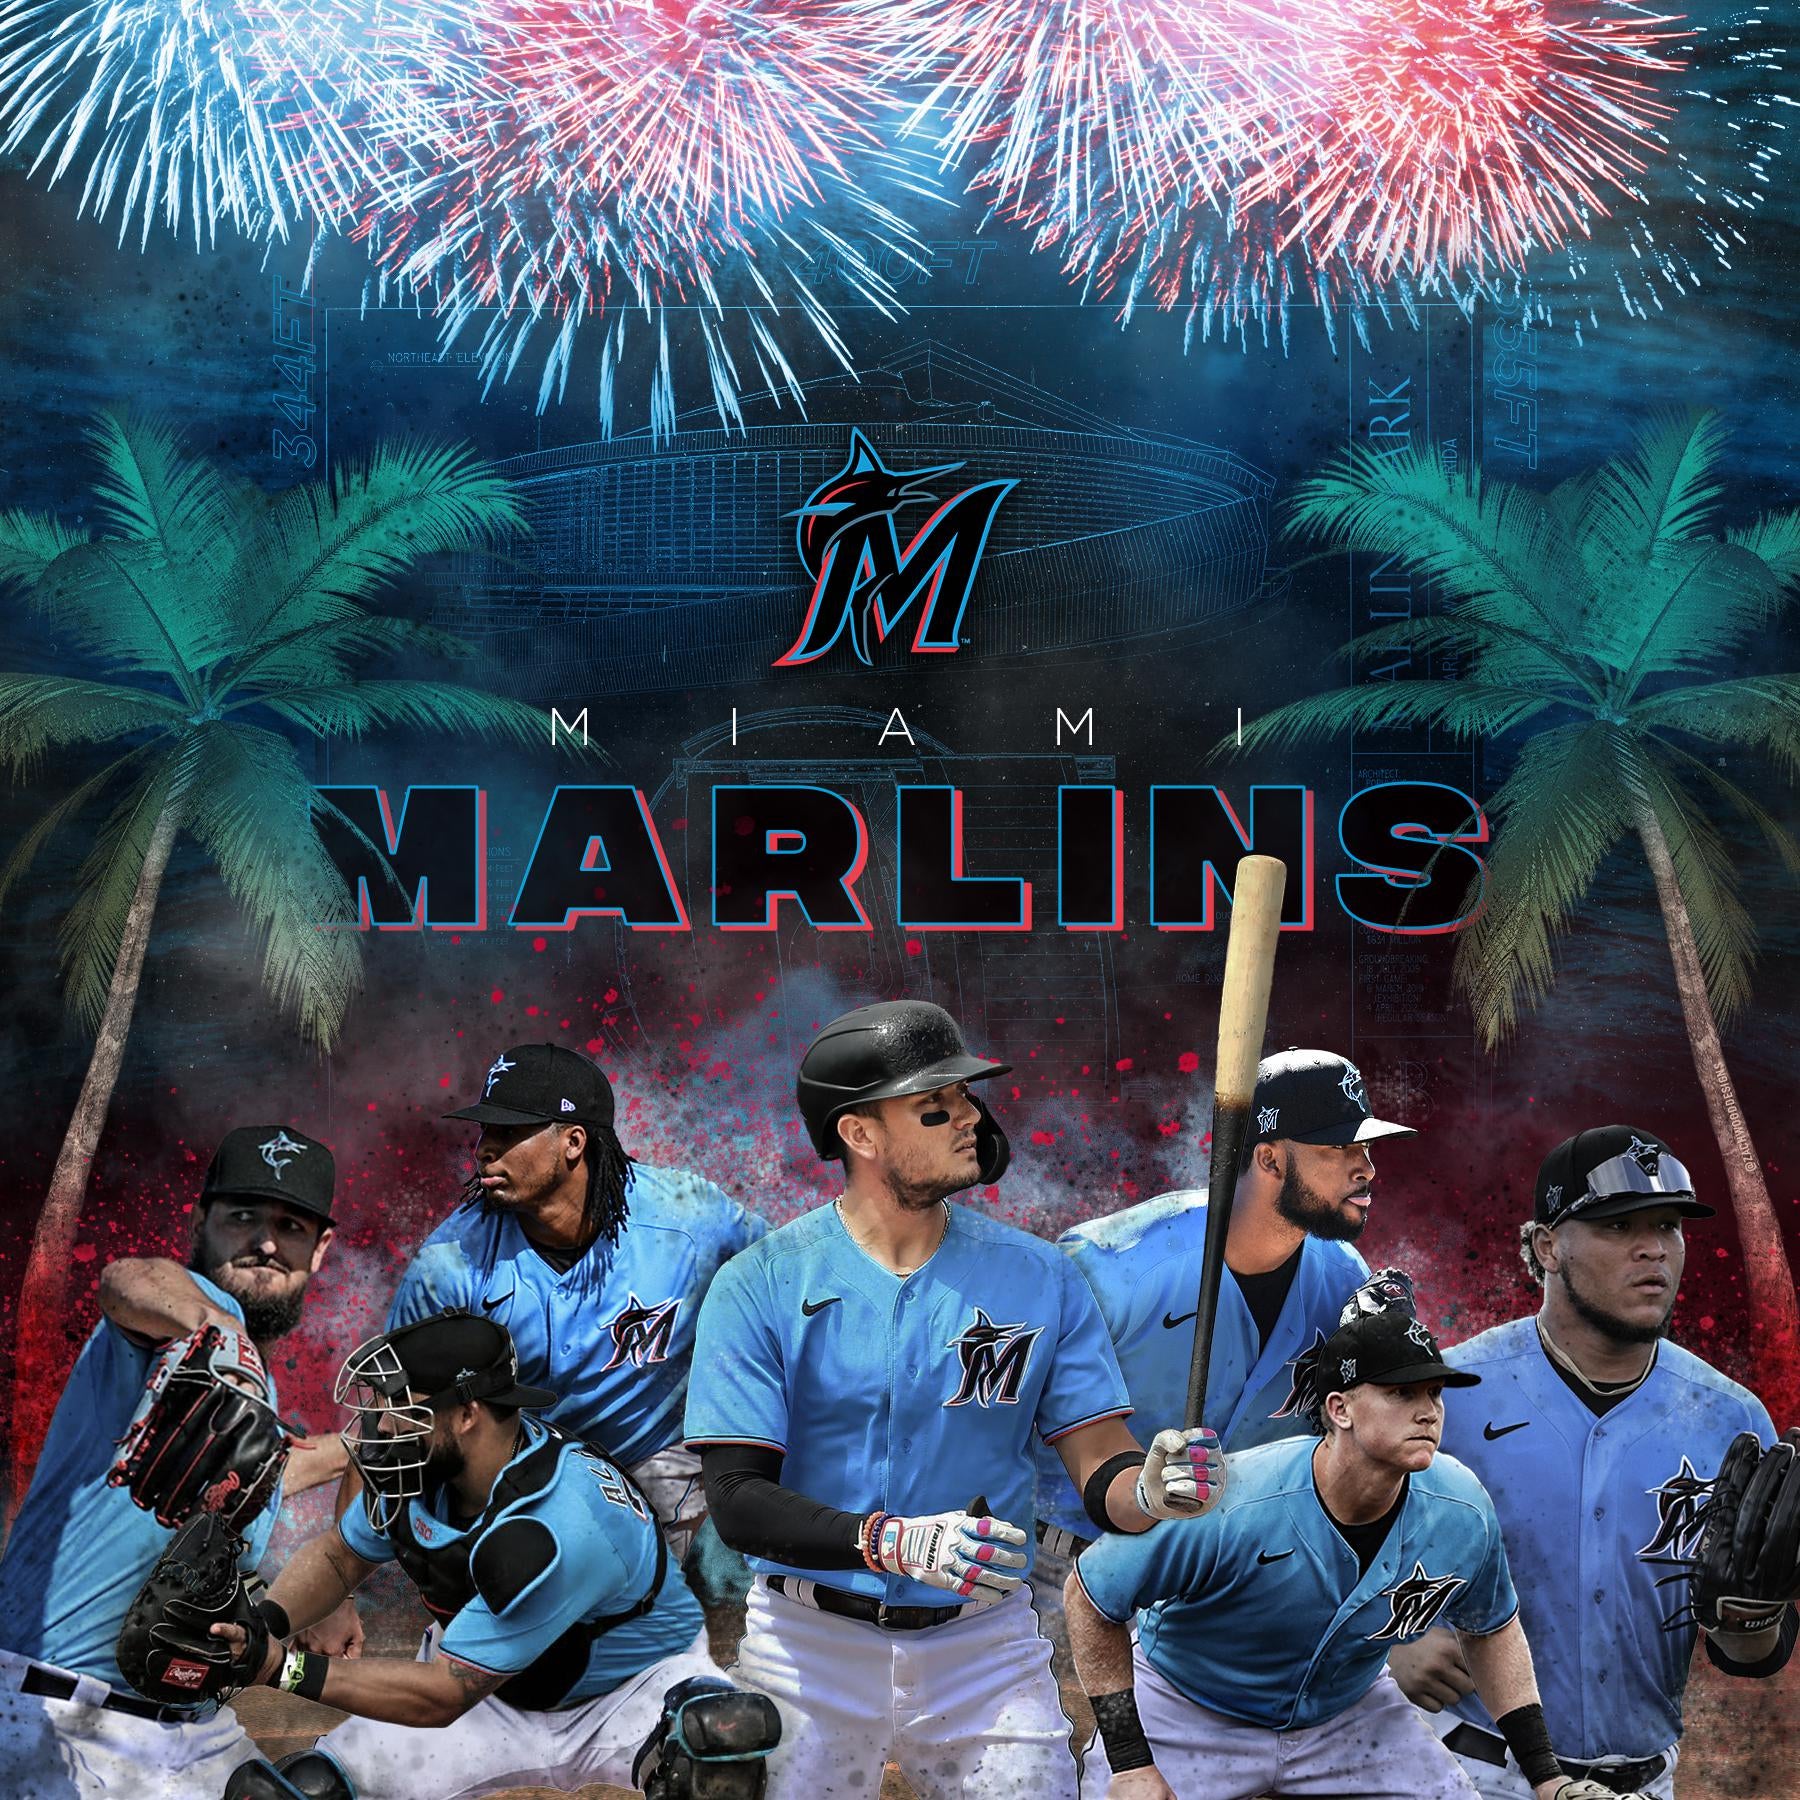 OC 9 30 Of My MLB Team Design Challenge, The Miami Marlins. Thank You For Your Help Marlins Fans!! IPhone X Wallpaper This Week.: Letsgofish